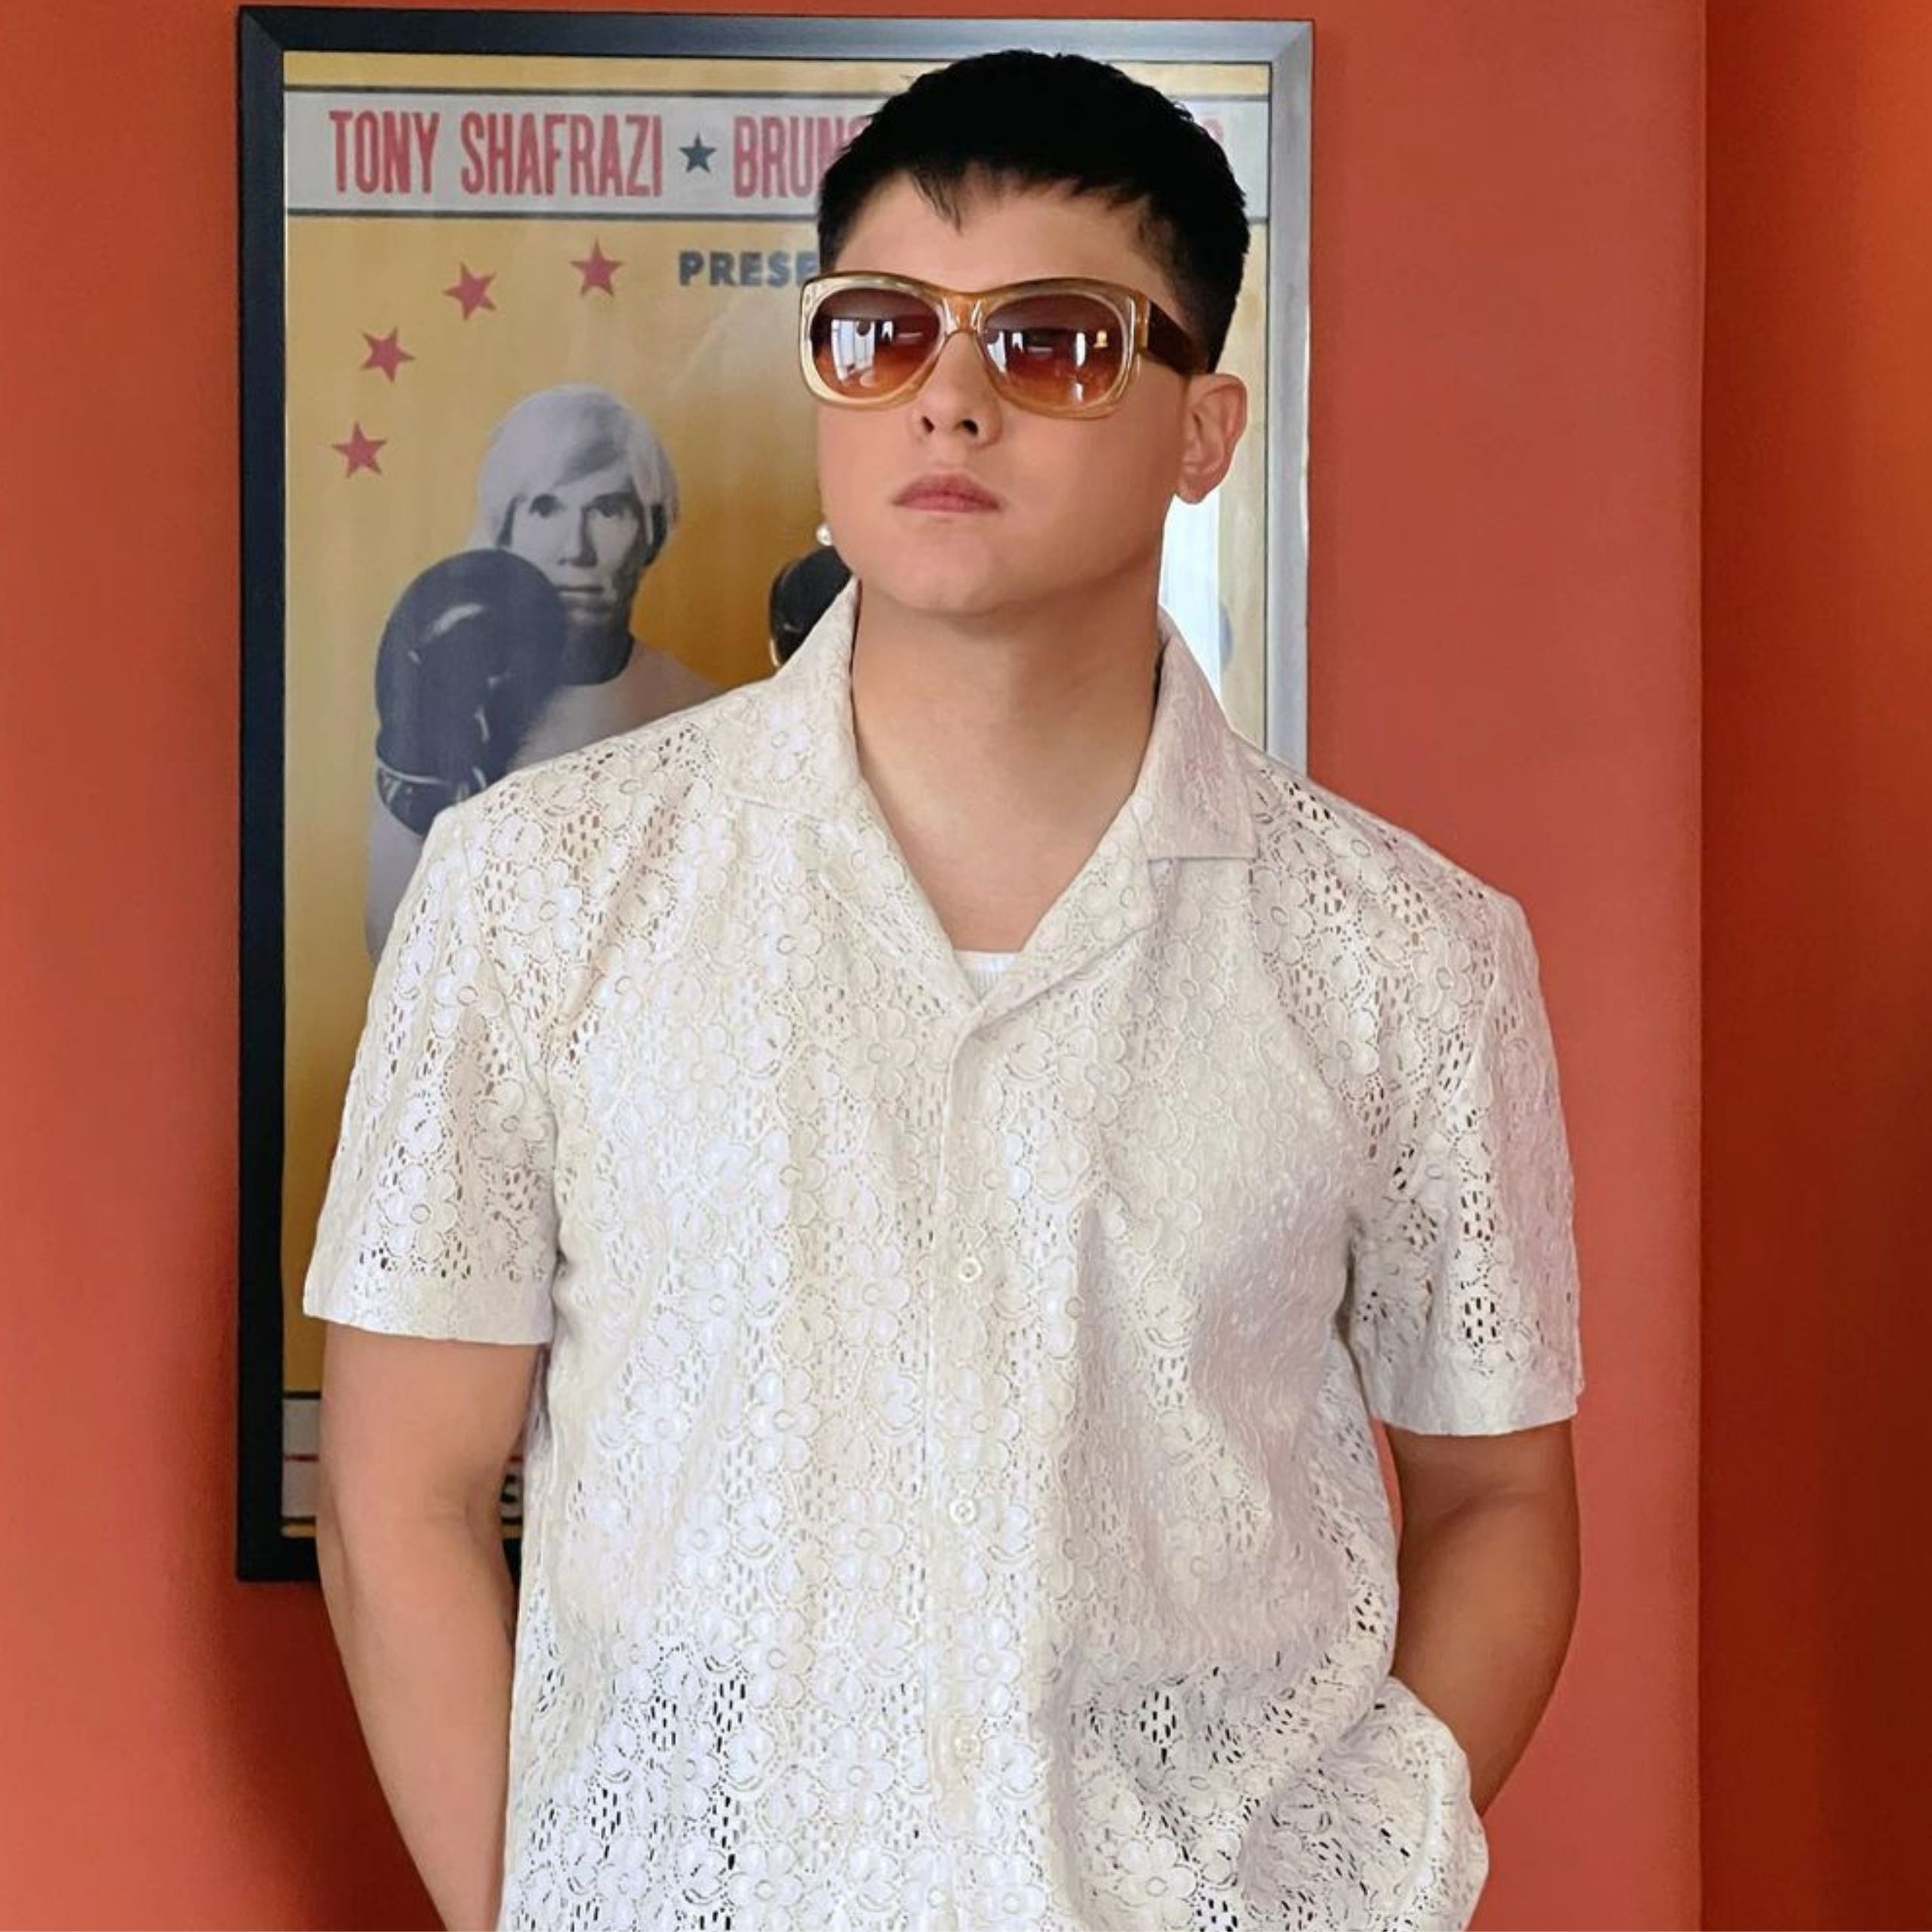 Exclusive: Daniel Padilla's Hairstylist Reveals the Inside Scoop on His Fresh, New Look